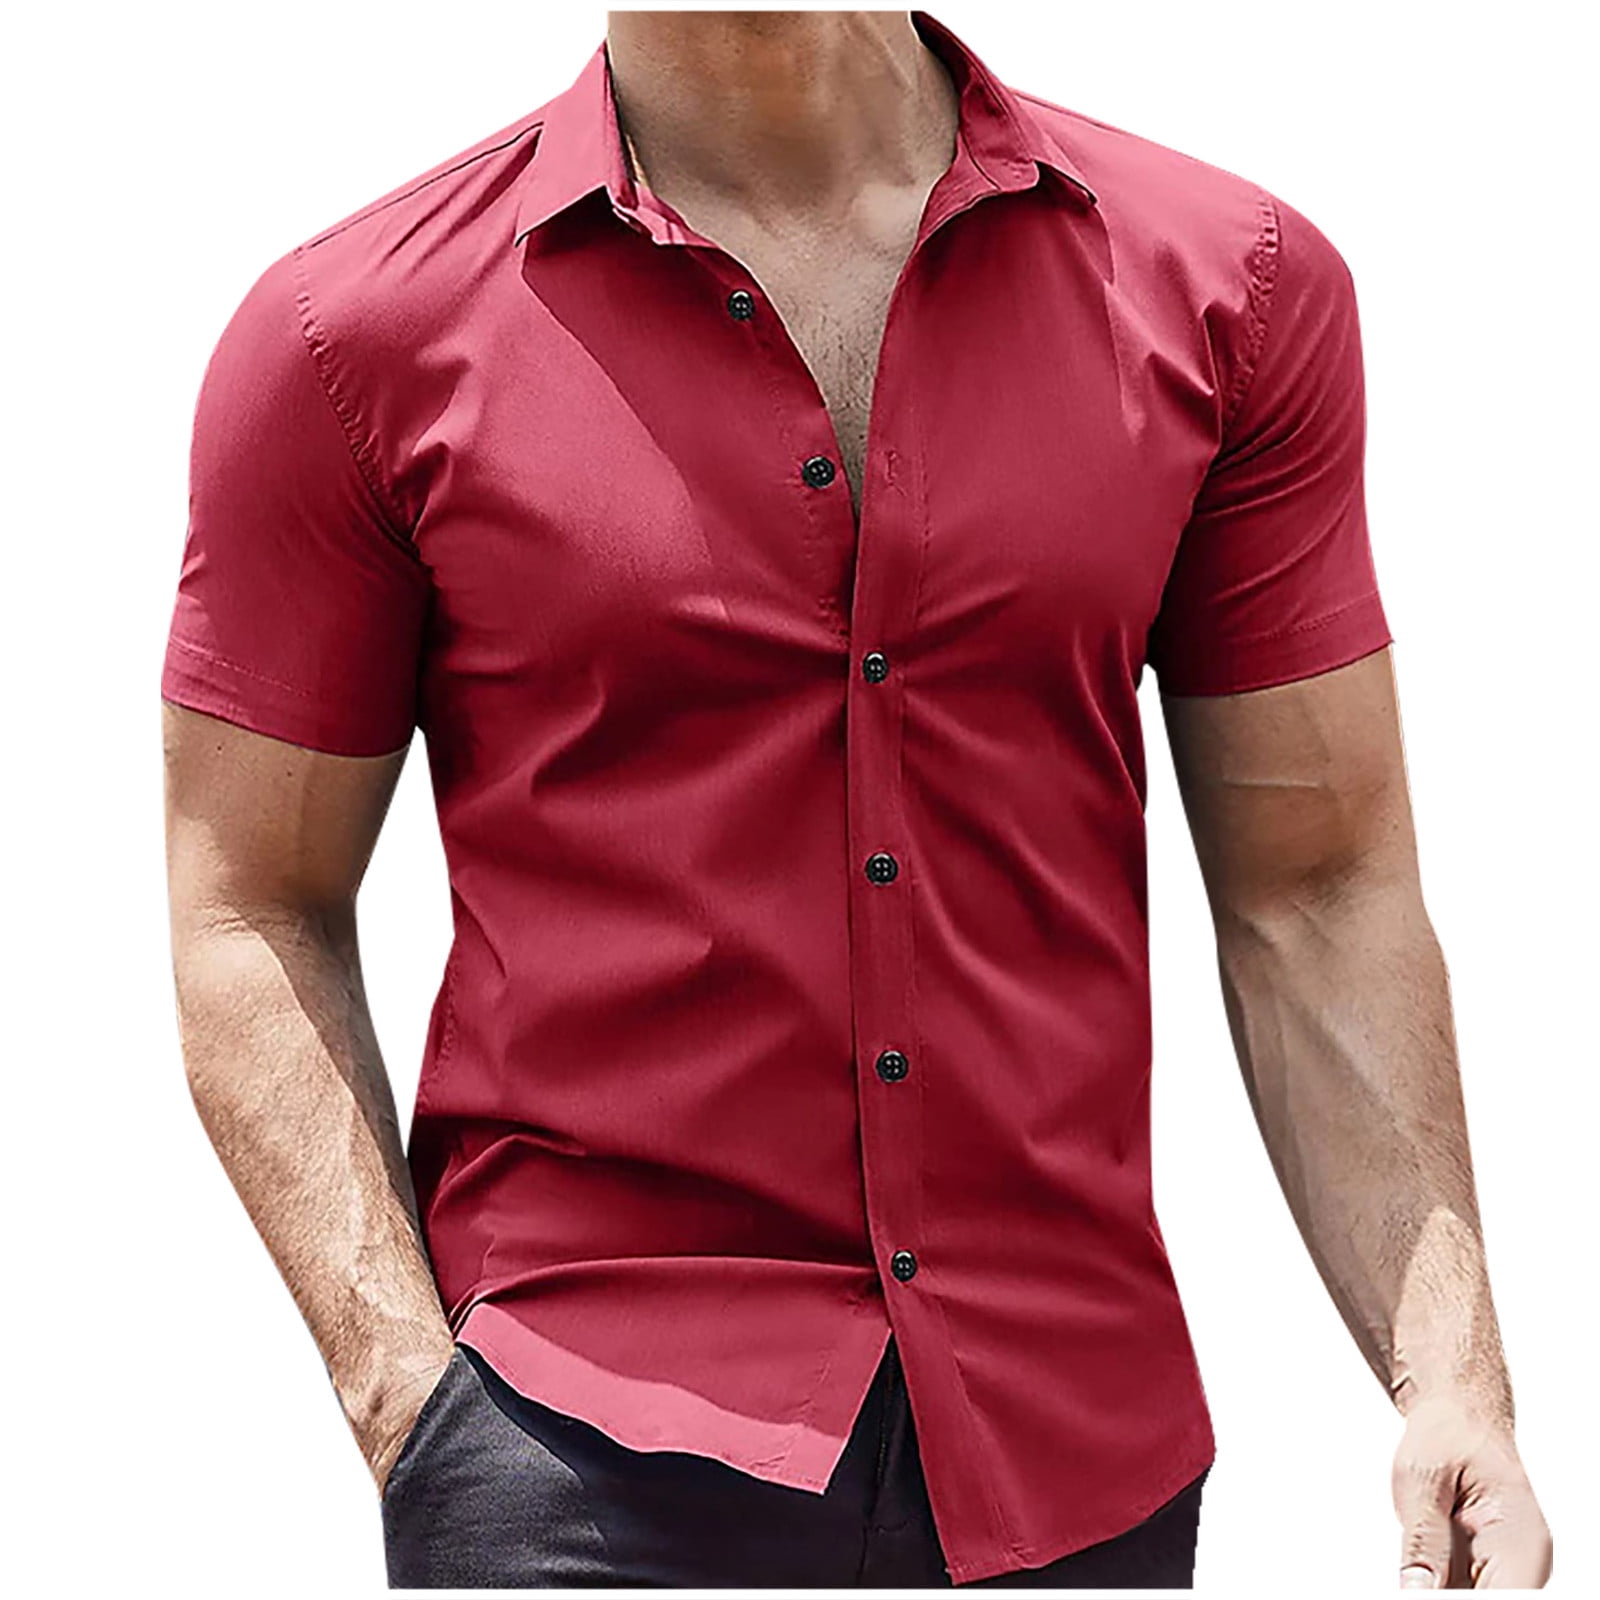 Miluxas Men's Muscle Fit Dress Clearance Shirts Wrinkle-Free Short ...